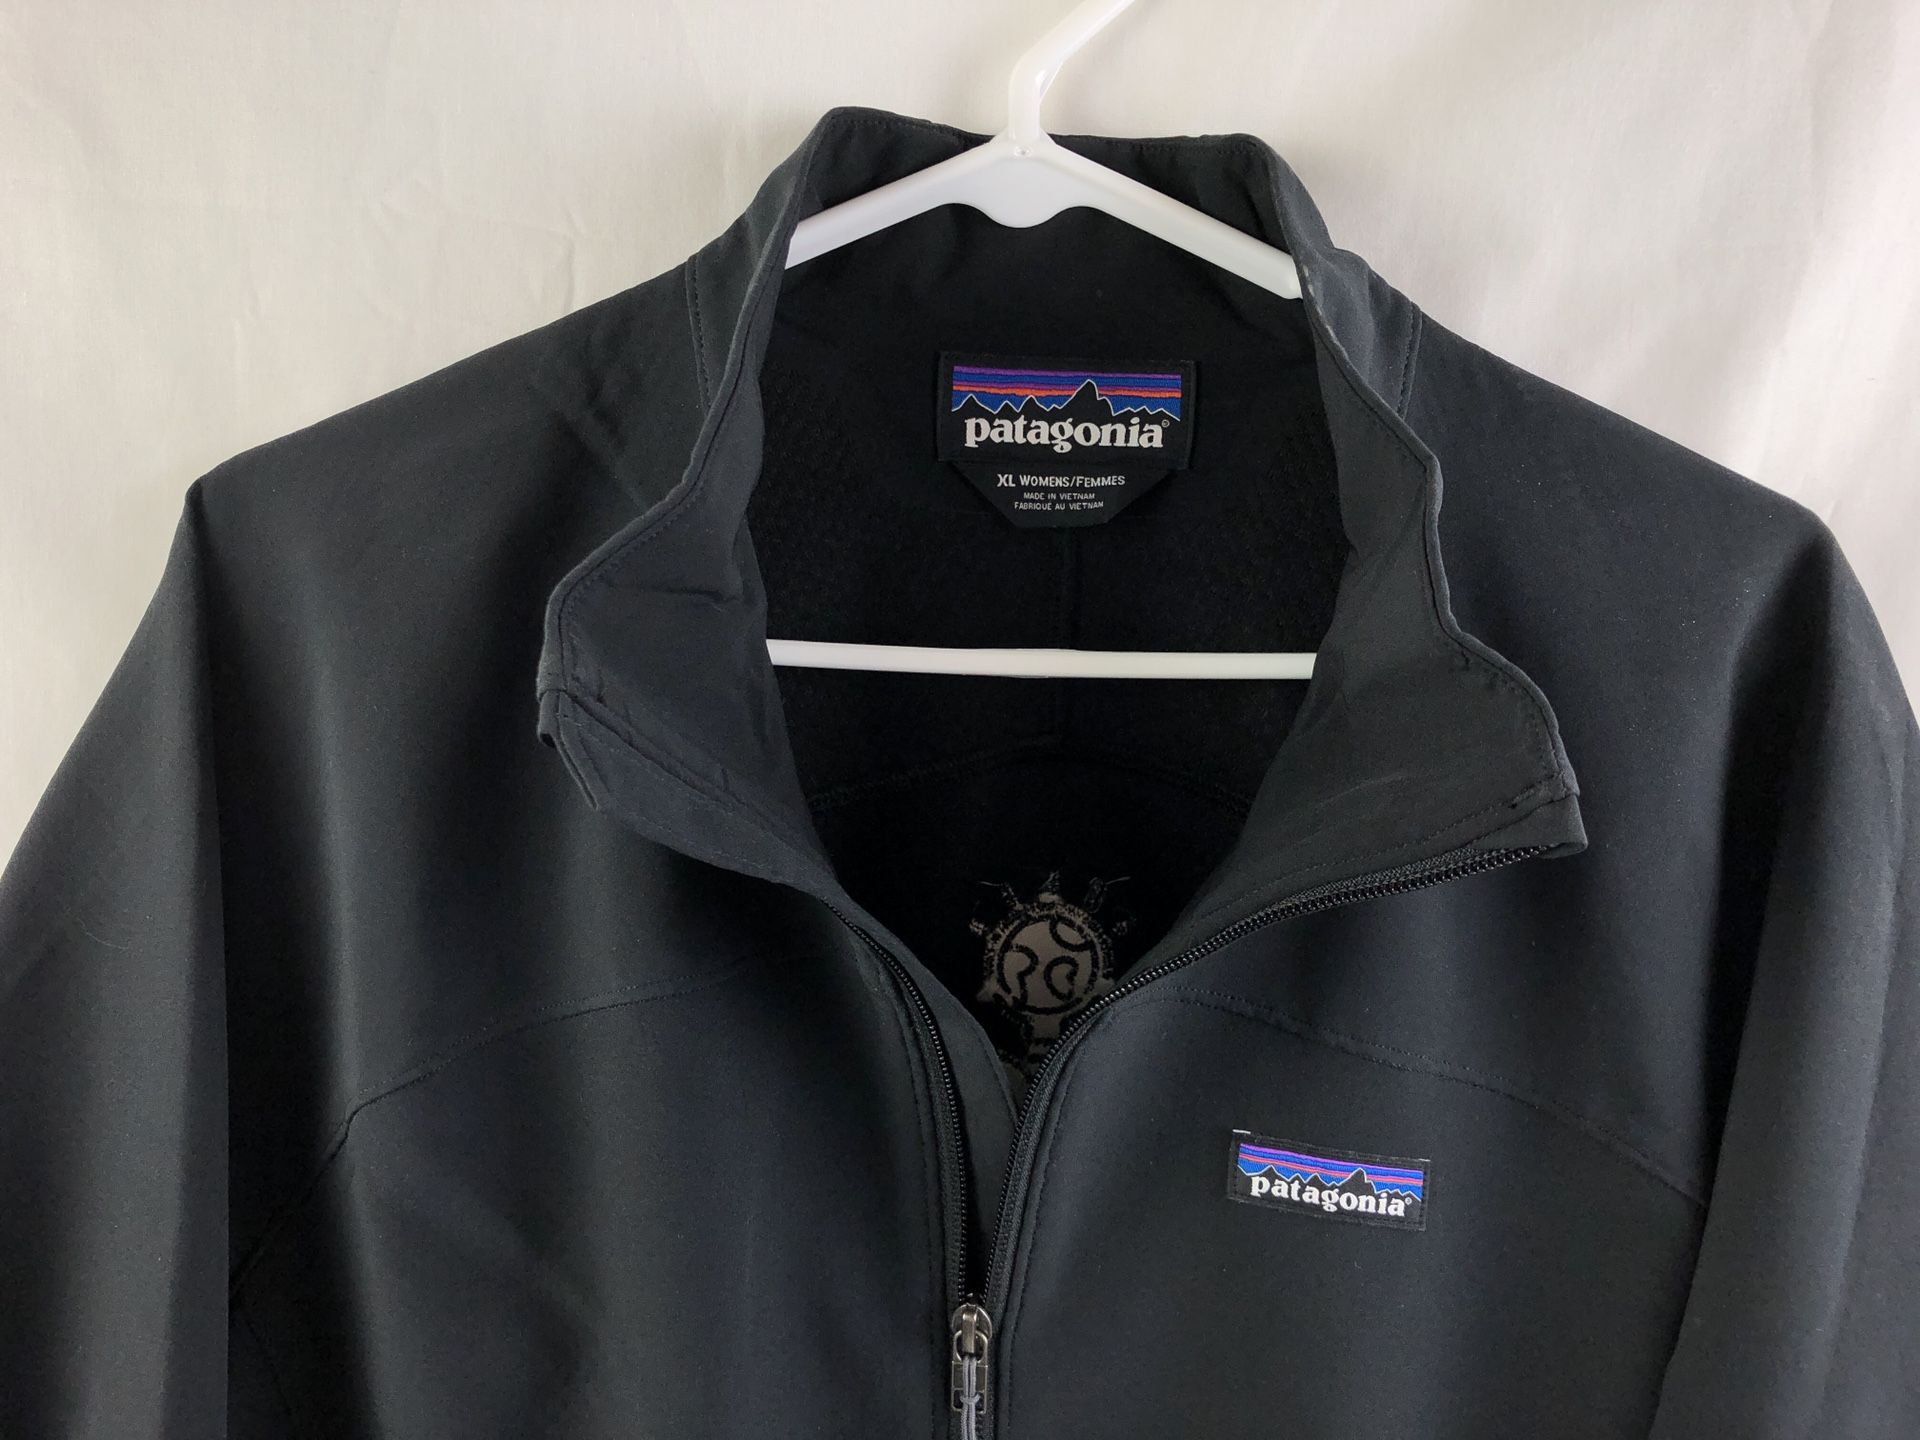 Patagonia soft shell jacket women’s size xl balls full zip branded New